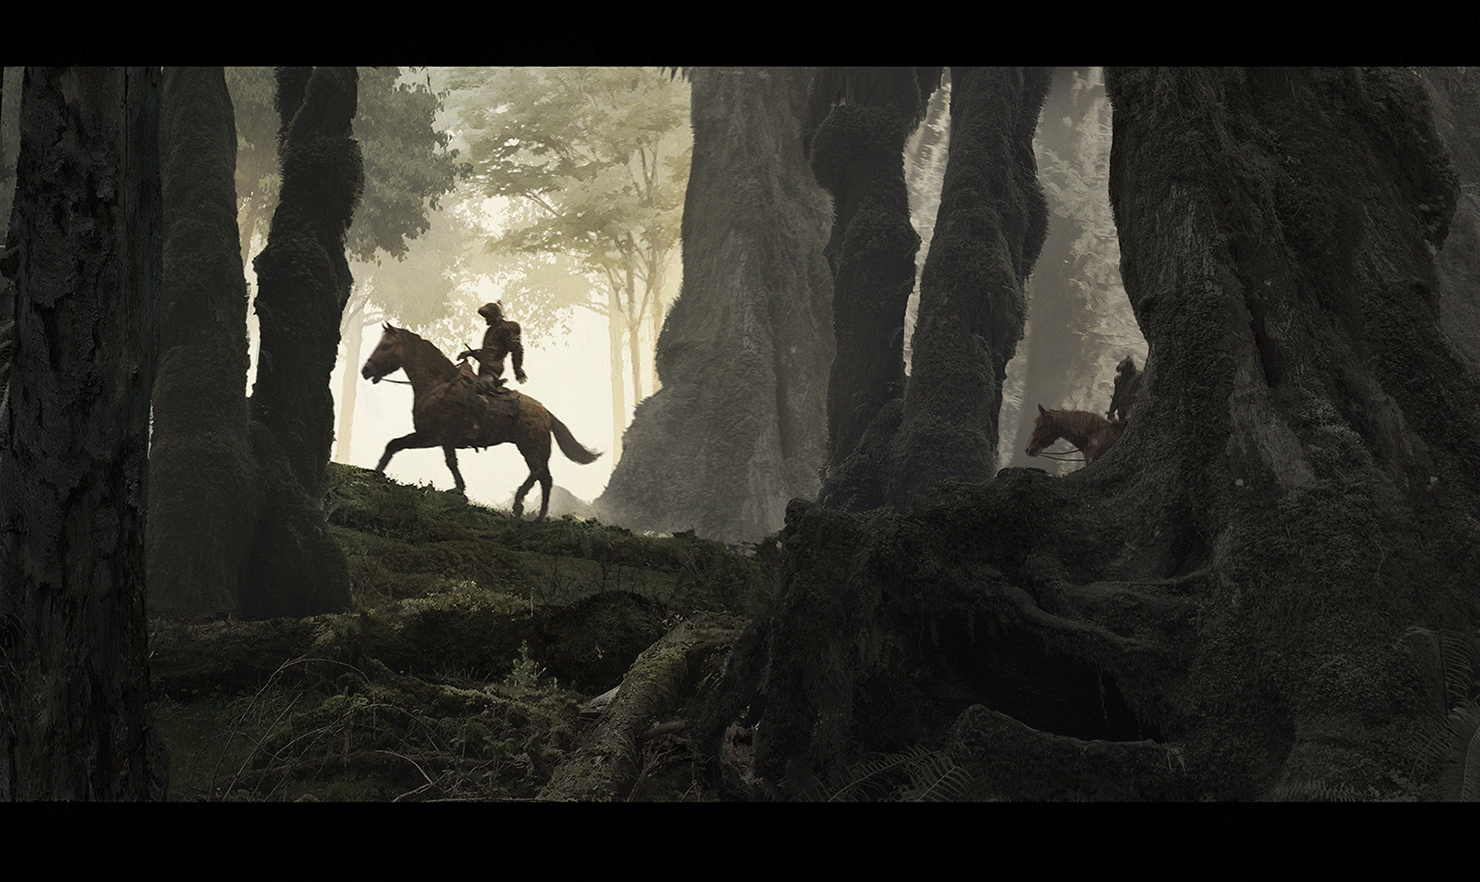 A digital illustration of two silhouetted soldiers riding through a forest